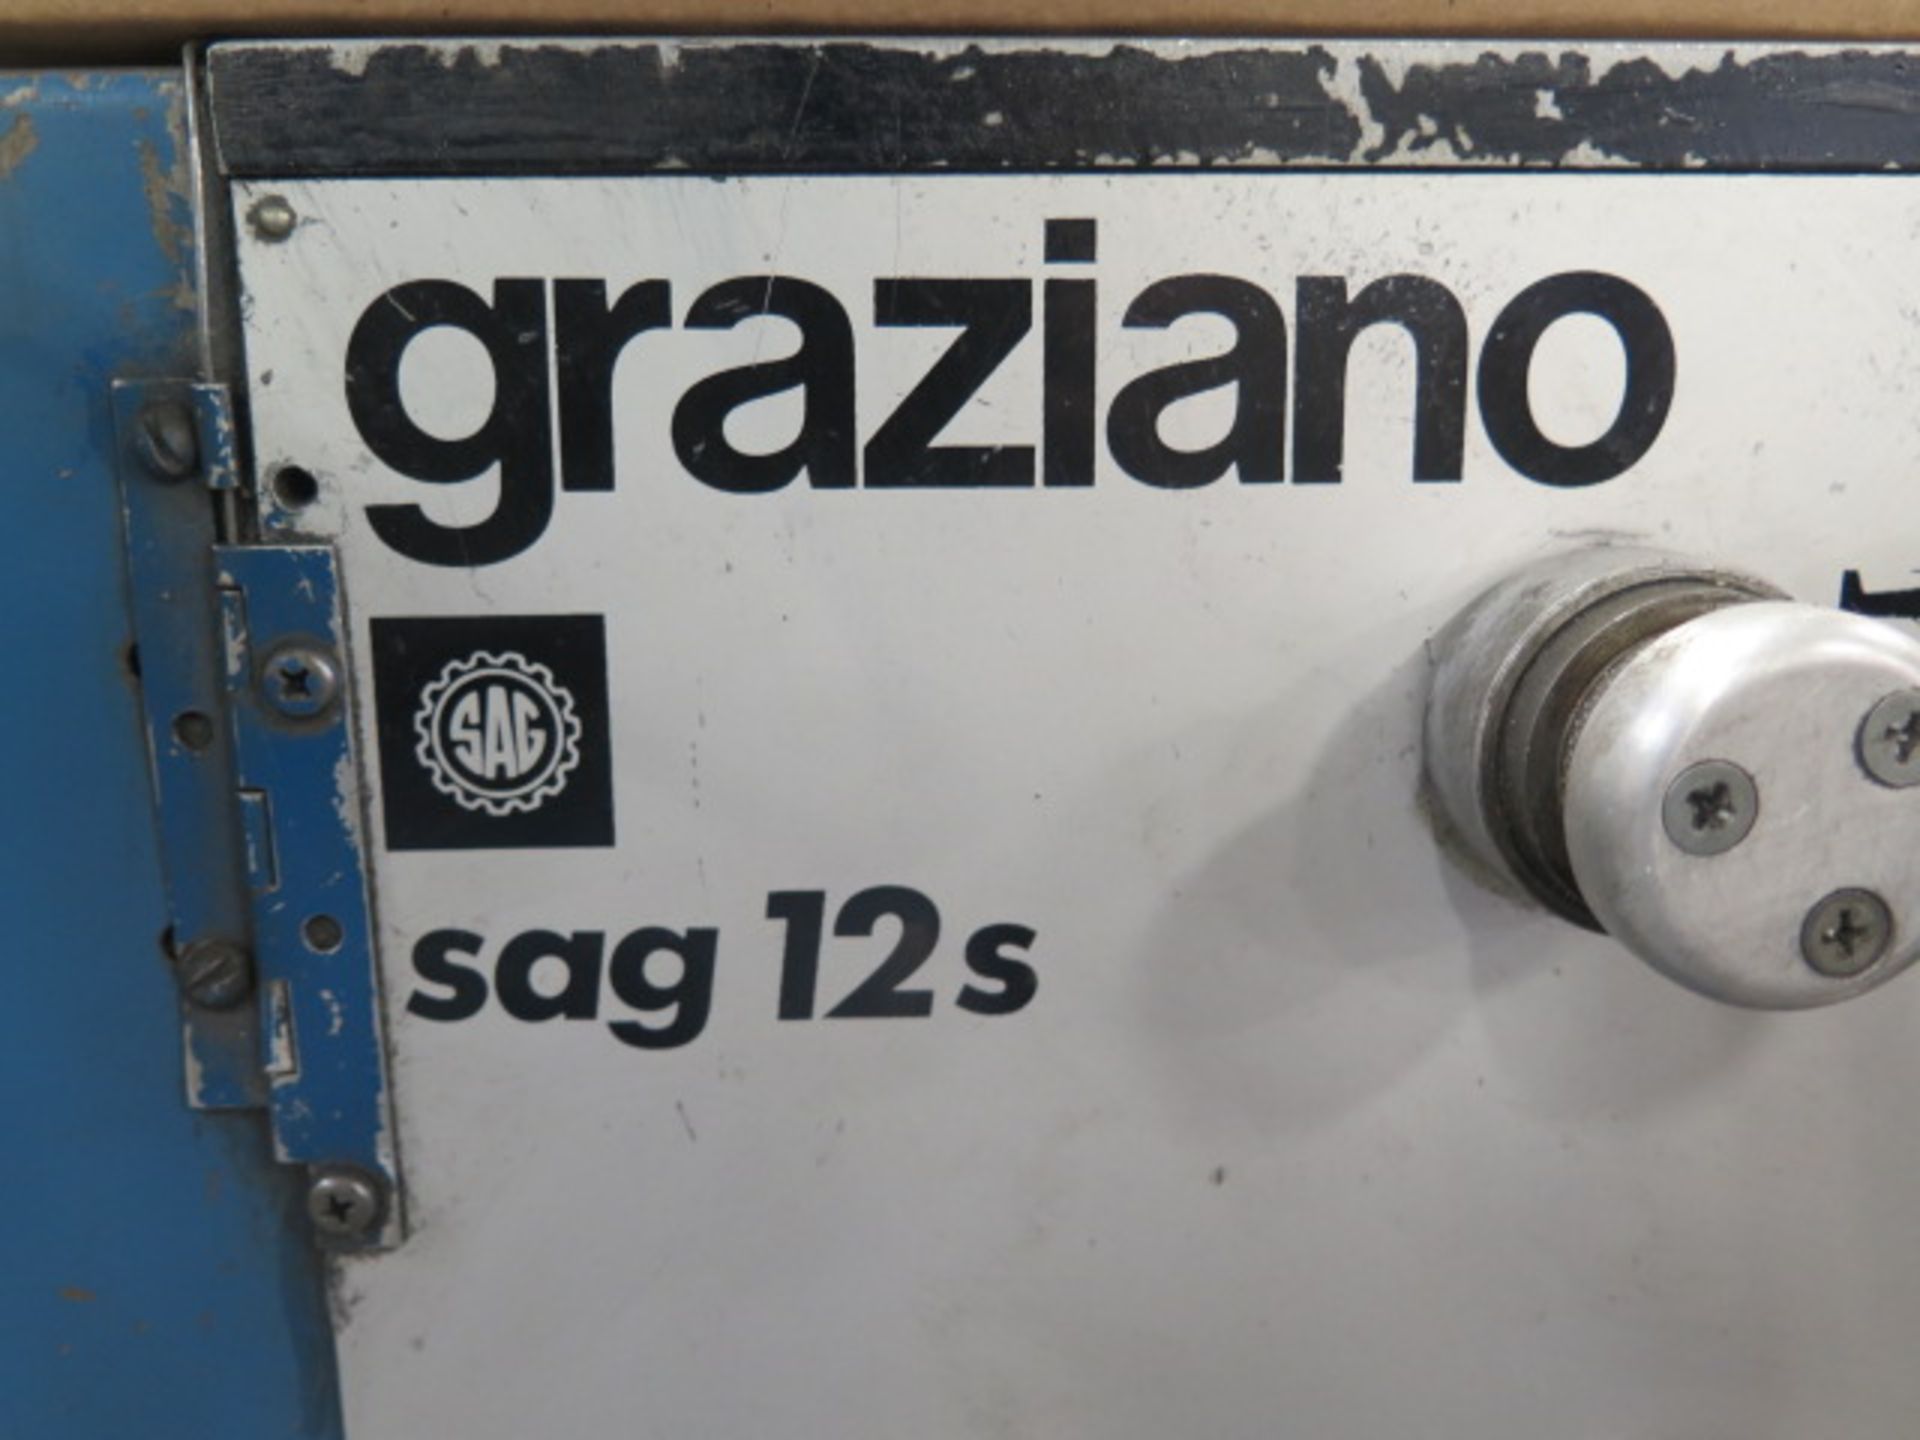 Graziano SAG-12S 12” x 32” Gap Bed Lathe s/n SAG-12-110224 w/ Adjustable RPM, Inch/mm Threading, - Image 12 of 12